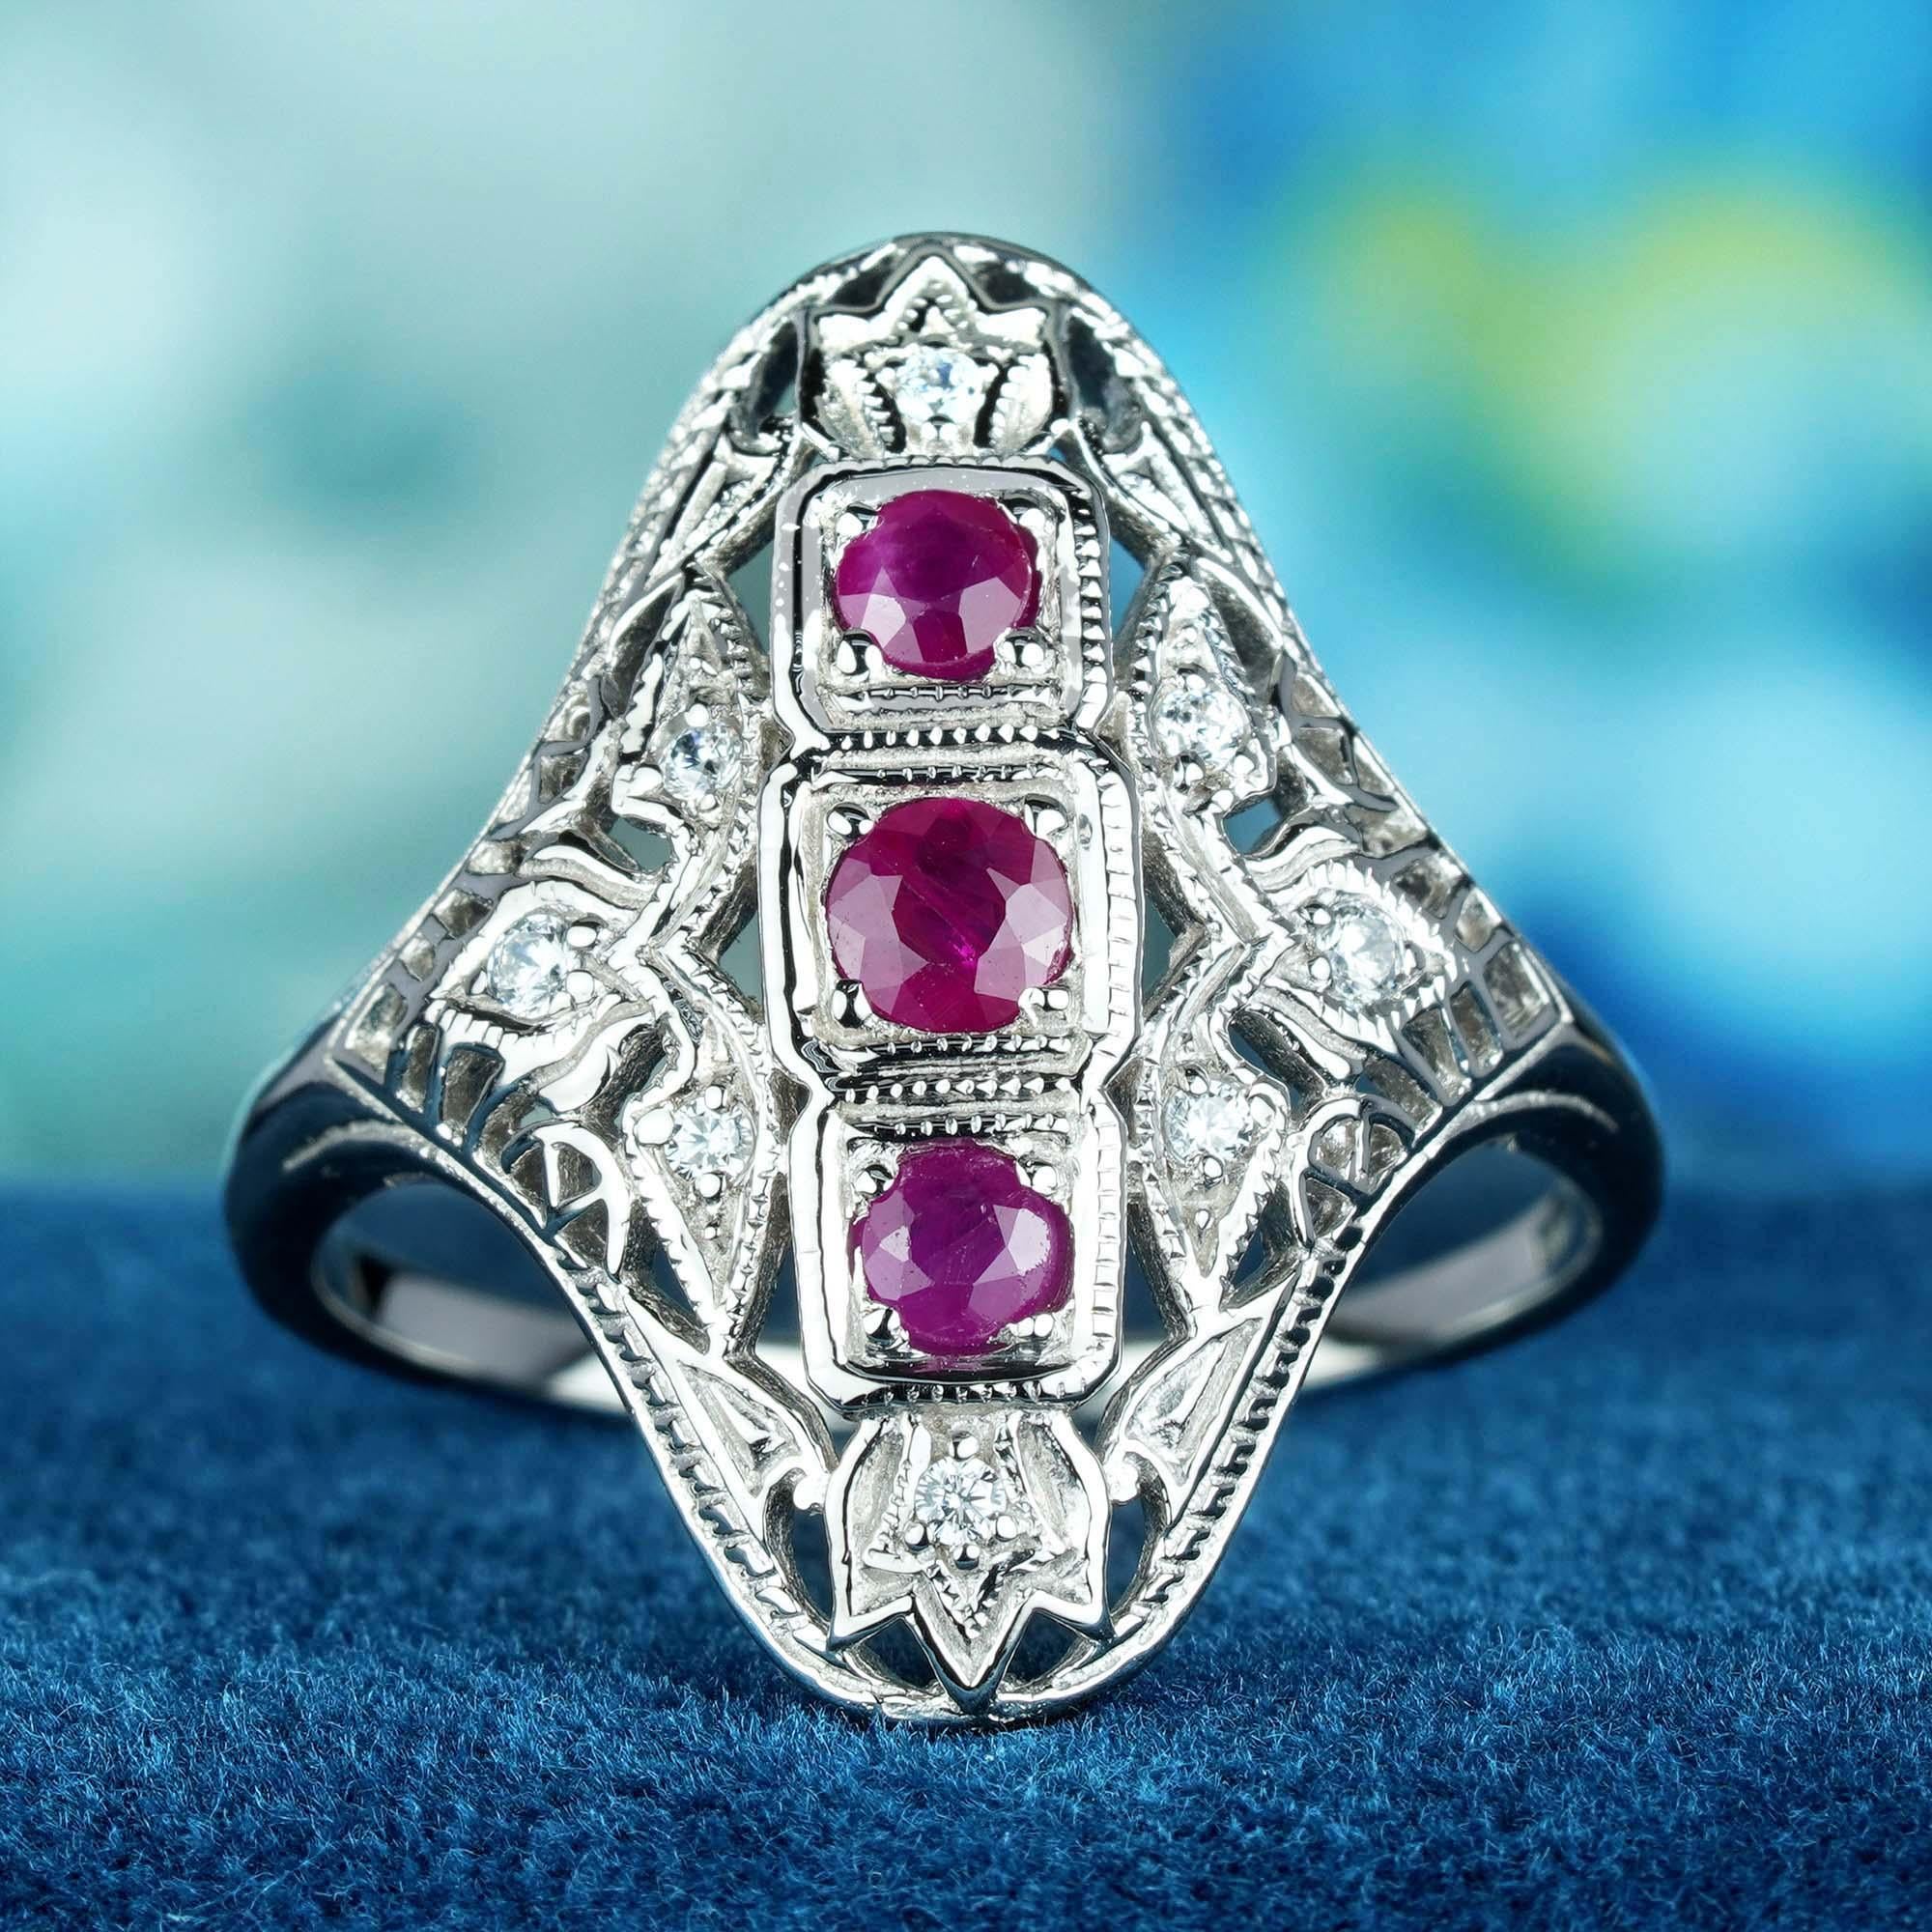 This Art Deco vintage-style ring. It features a central 3 cascading cluster of round red ruby set in a raised bezel, with delicate filigree work adorning the solid white gold band and shoulders adds a touch of femininity and romance to the ring. The